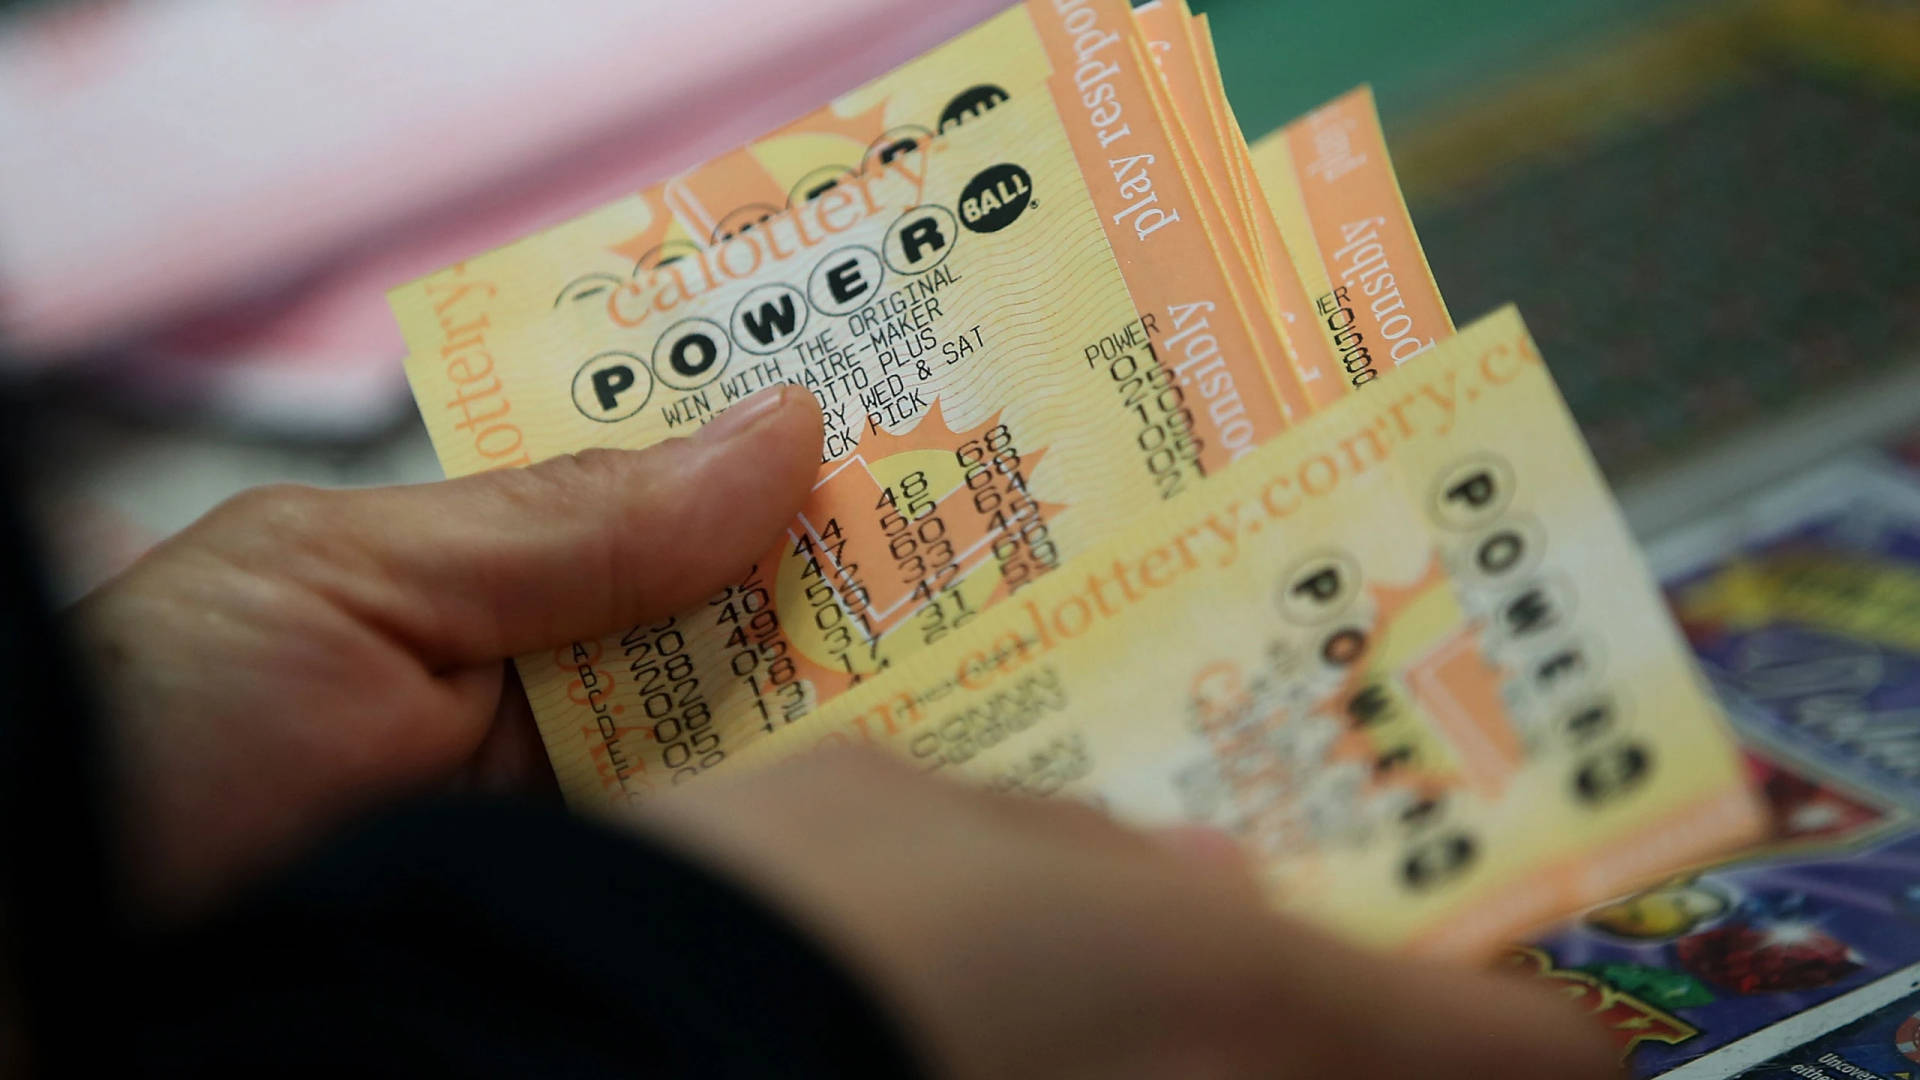 PowerballTickets (in the context of computer or mobile wallpaper): Powerball-Tickets. Wallpaper